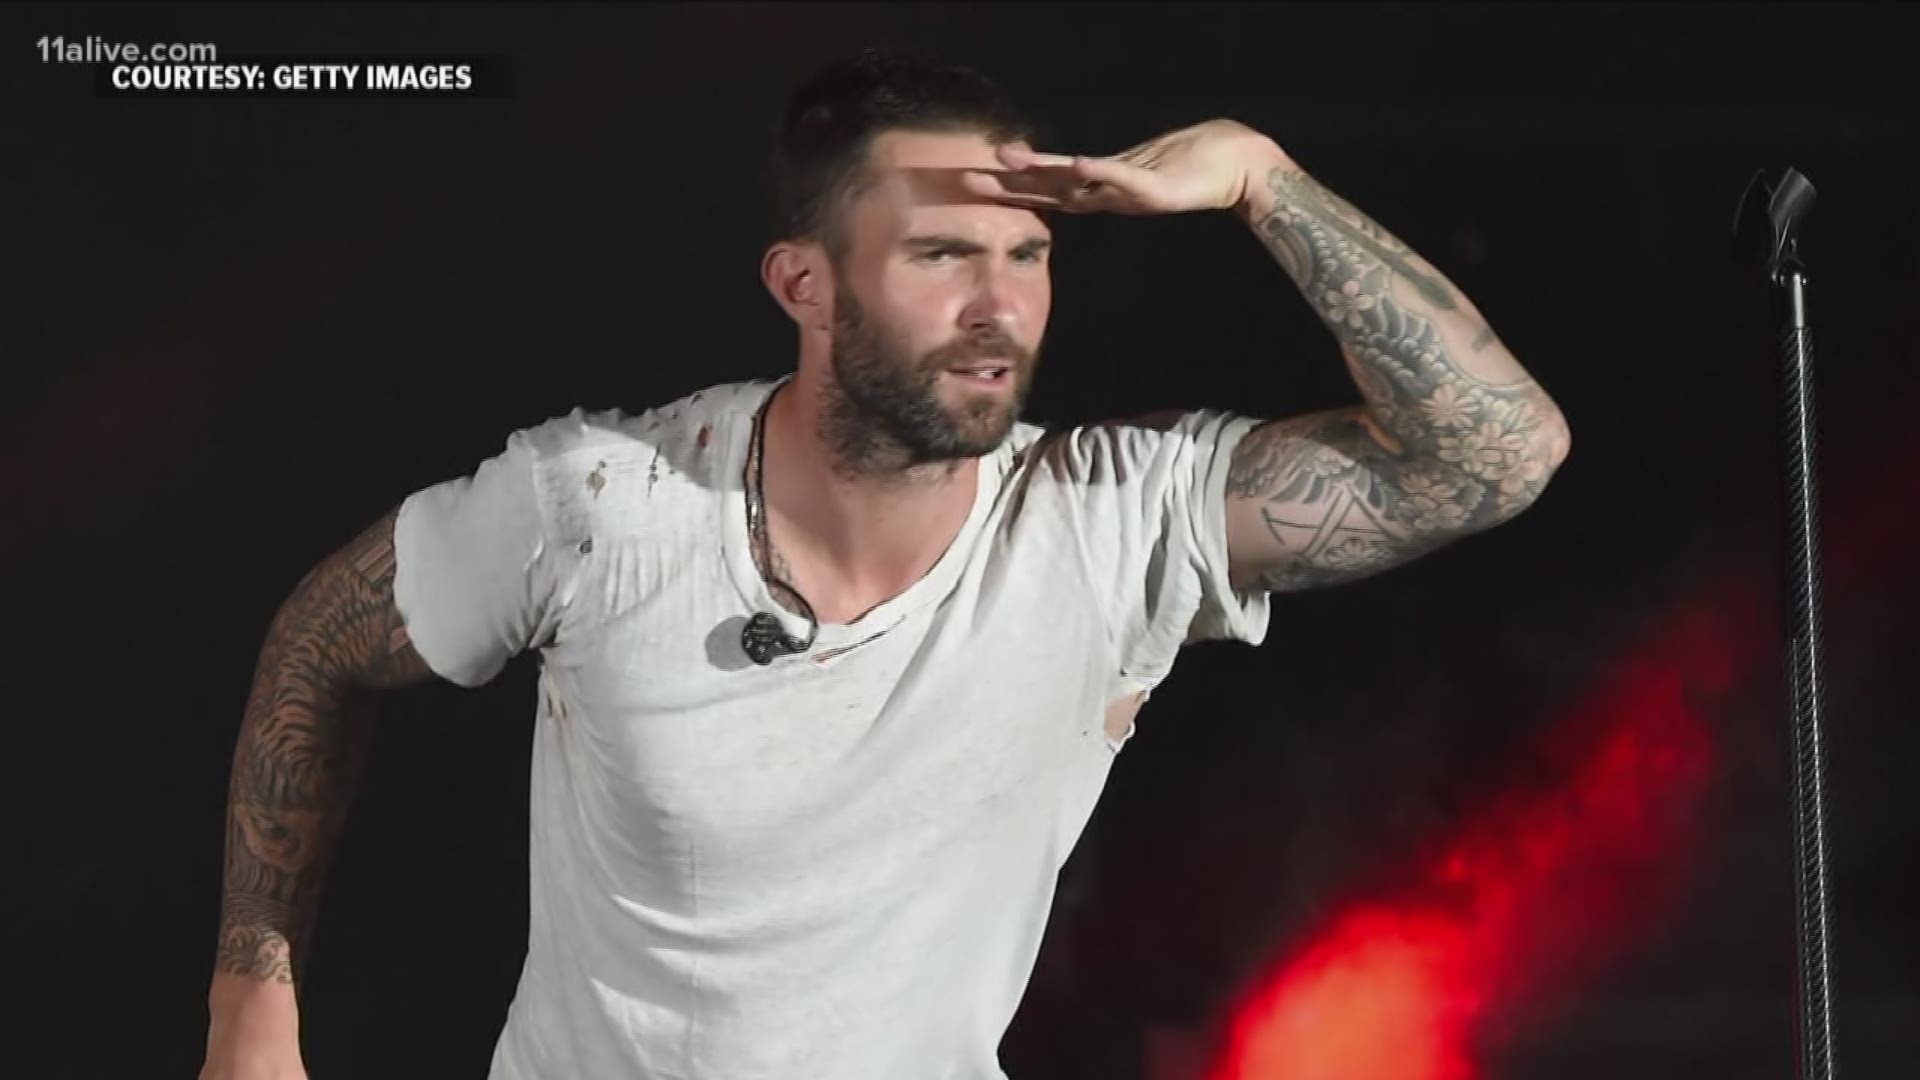 Opinion: Super Bowl halftime show was more about Adam Levine, less